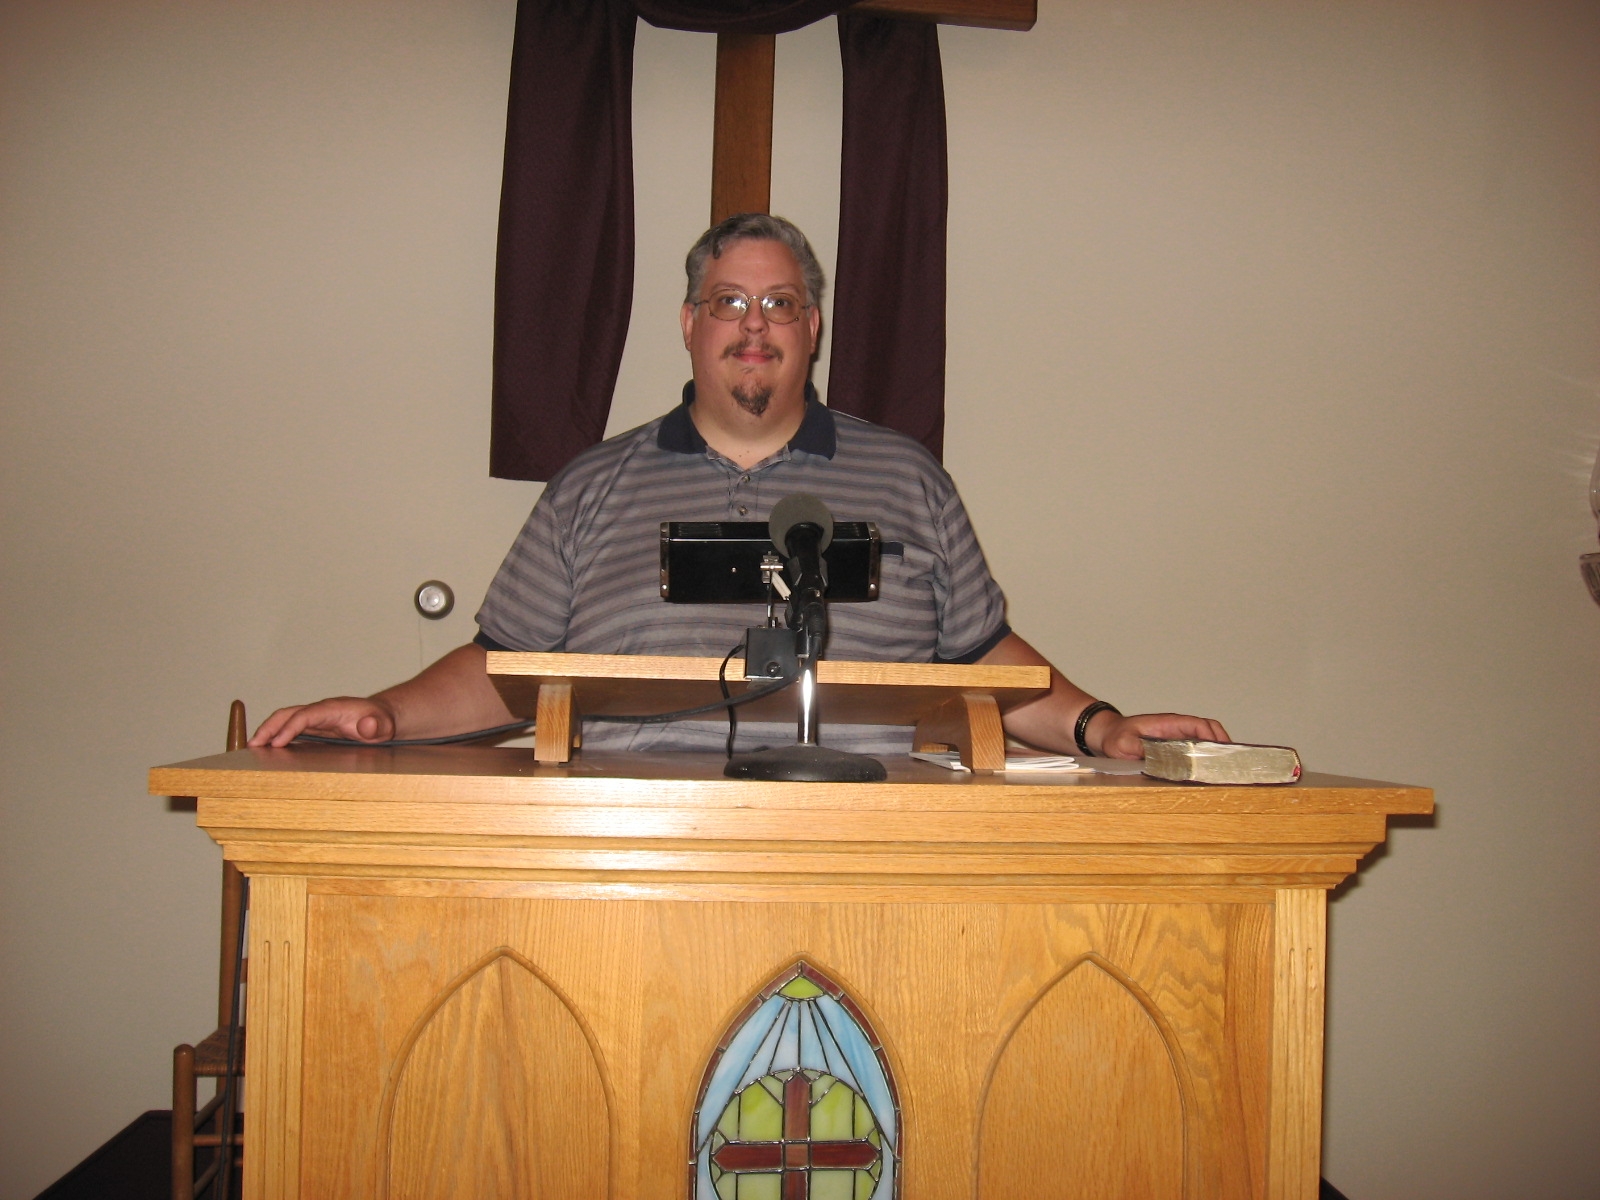 Me behind in the pulpit